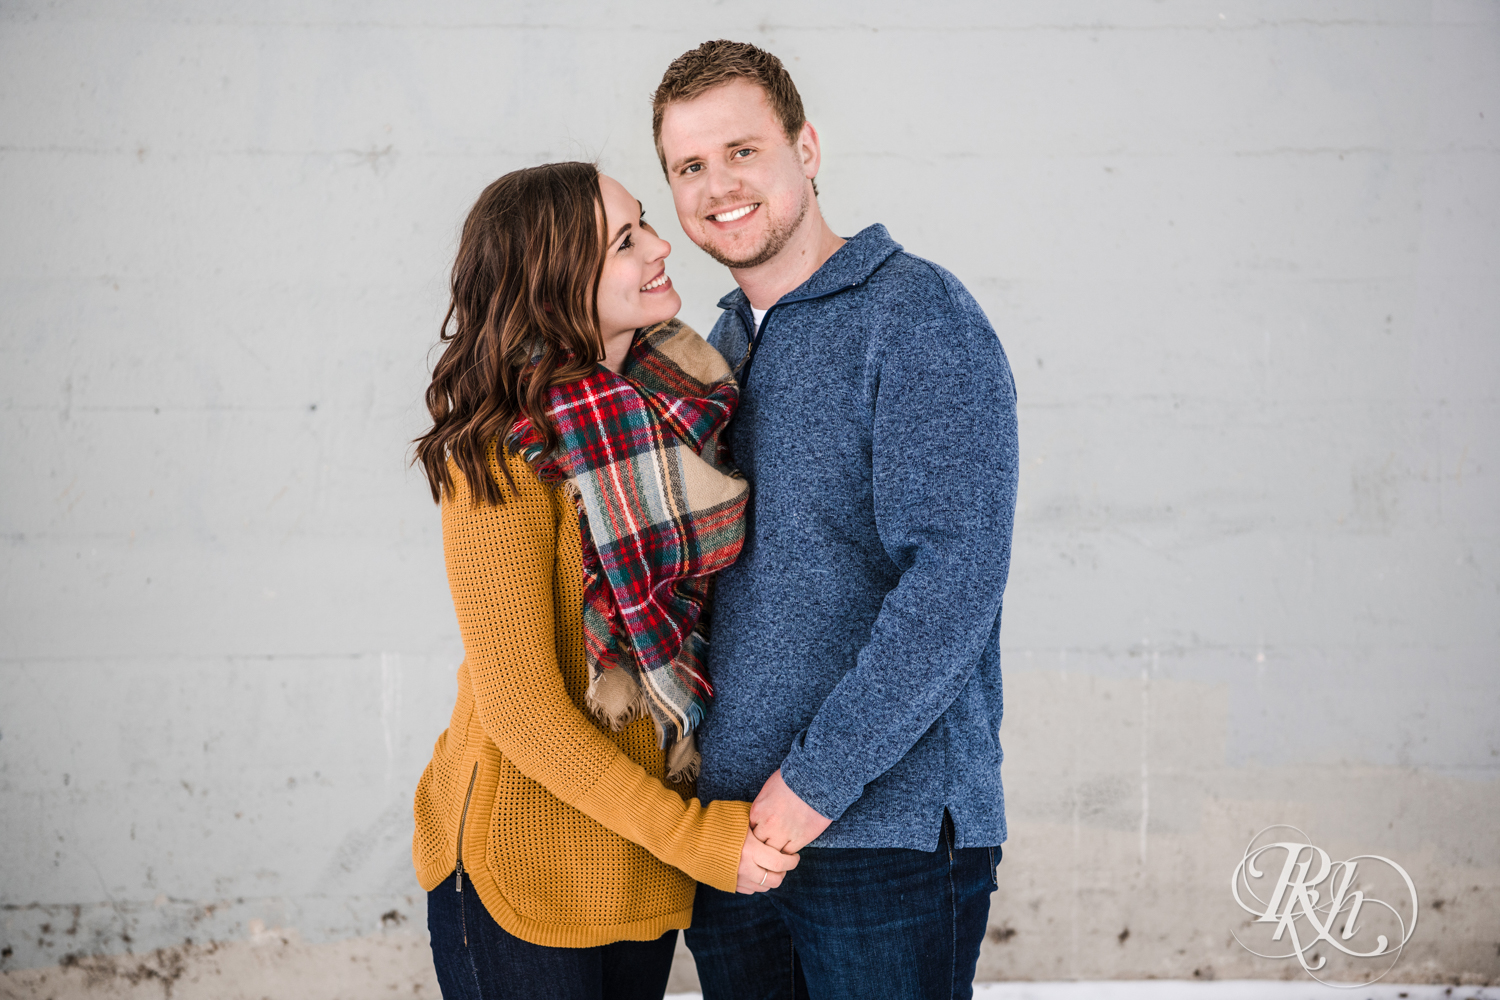 Man and woman smile during winter engagement photography in Minneapolis, Minnesota.